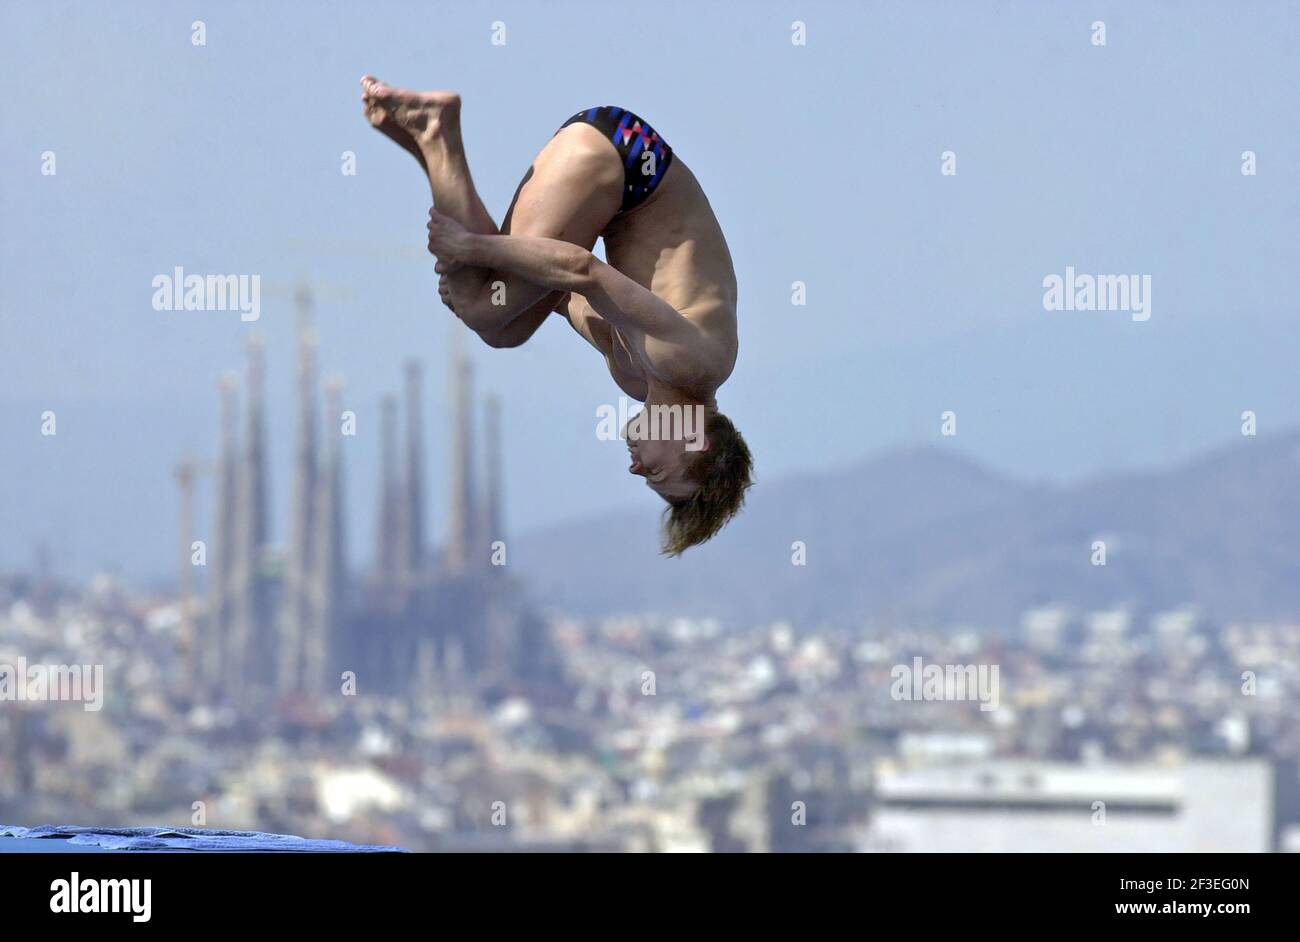 Diving World Championship from the panoramic ten meters diving platform, and the Sagrada Familia's cathedral in the background, in Barcelona, Spain. Stock Photo